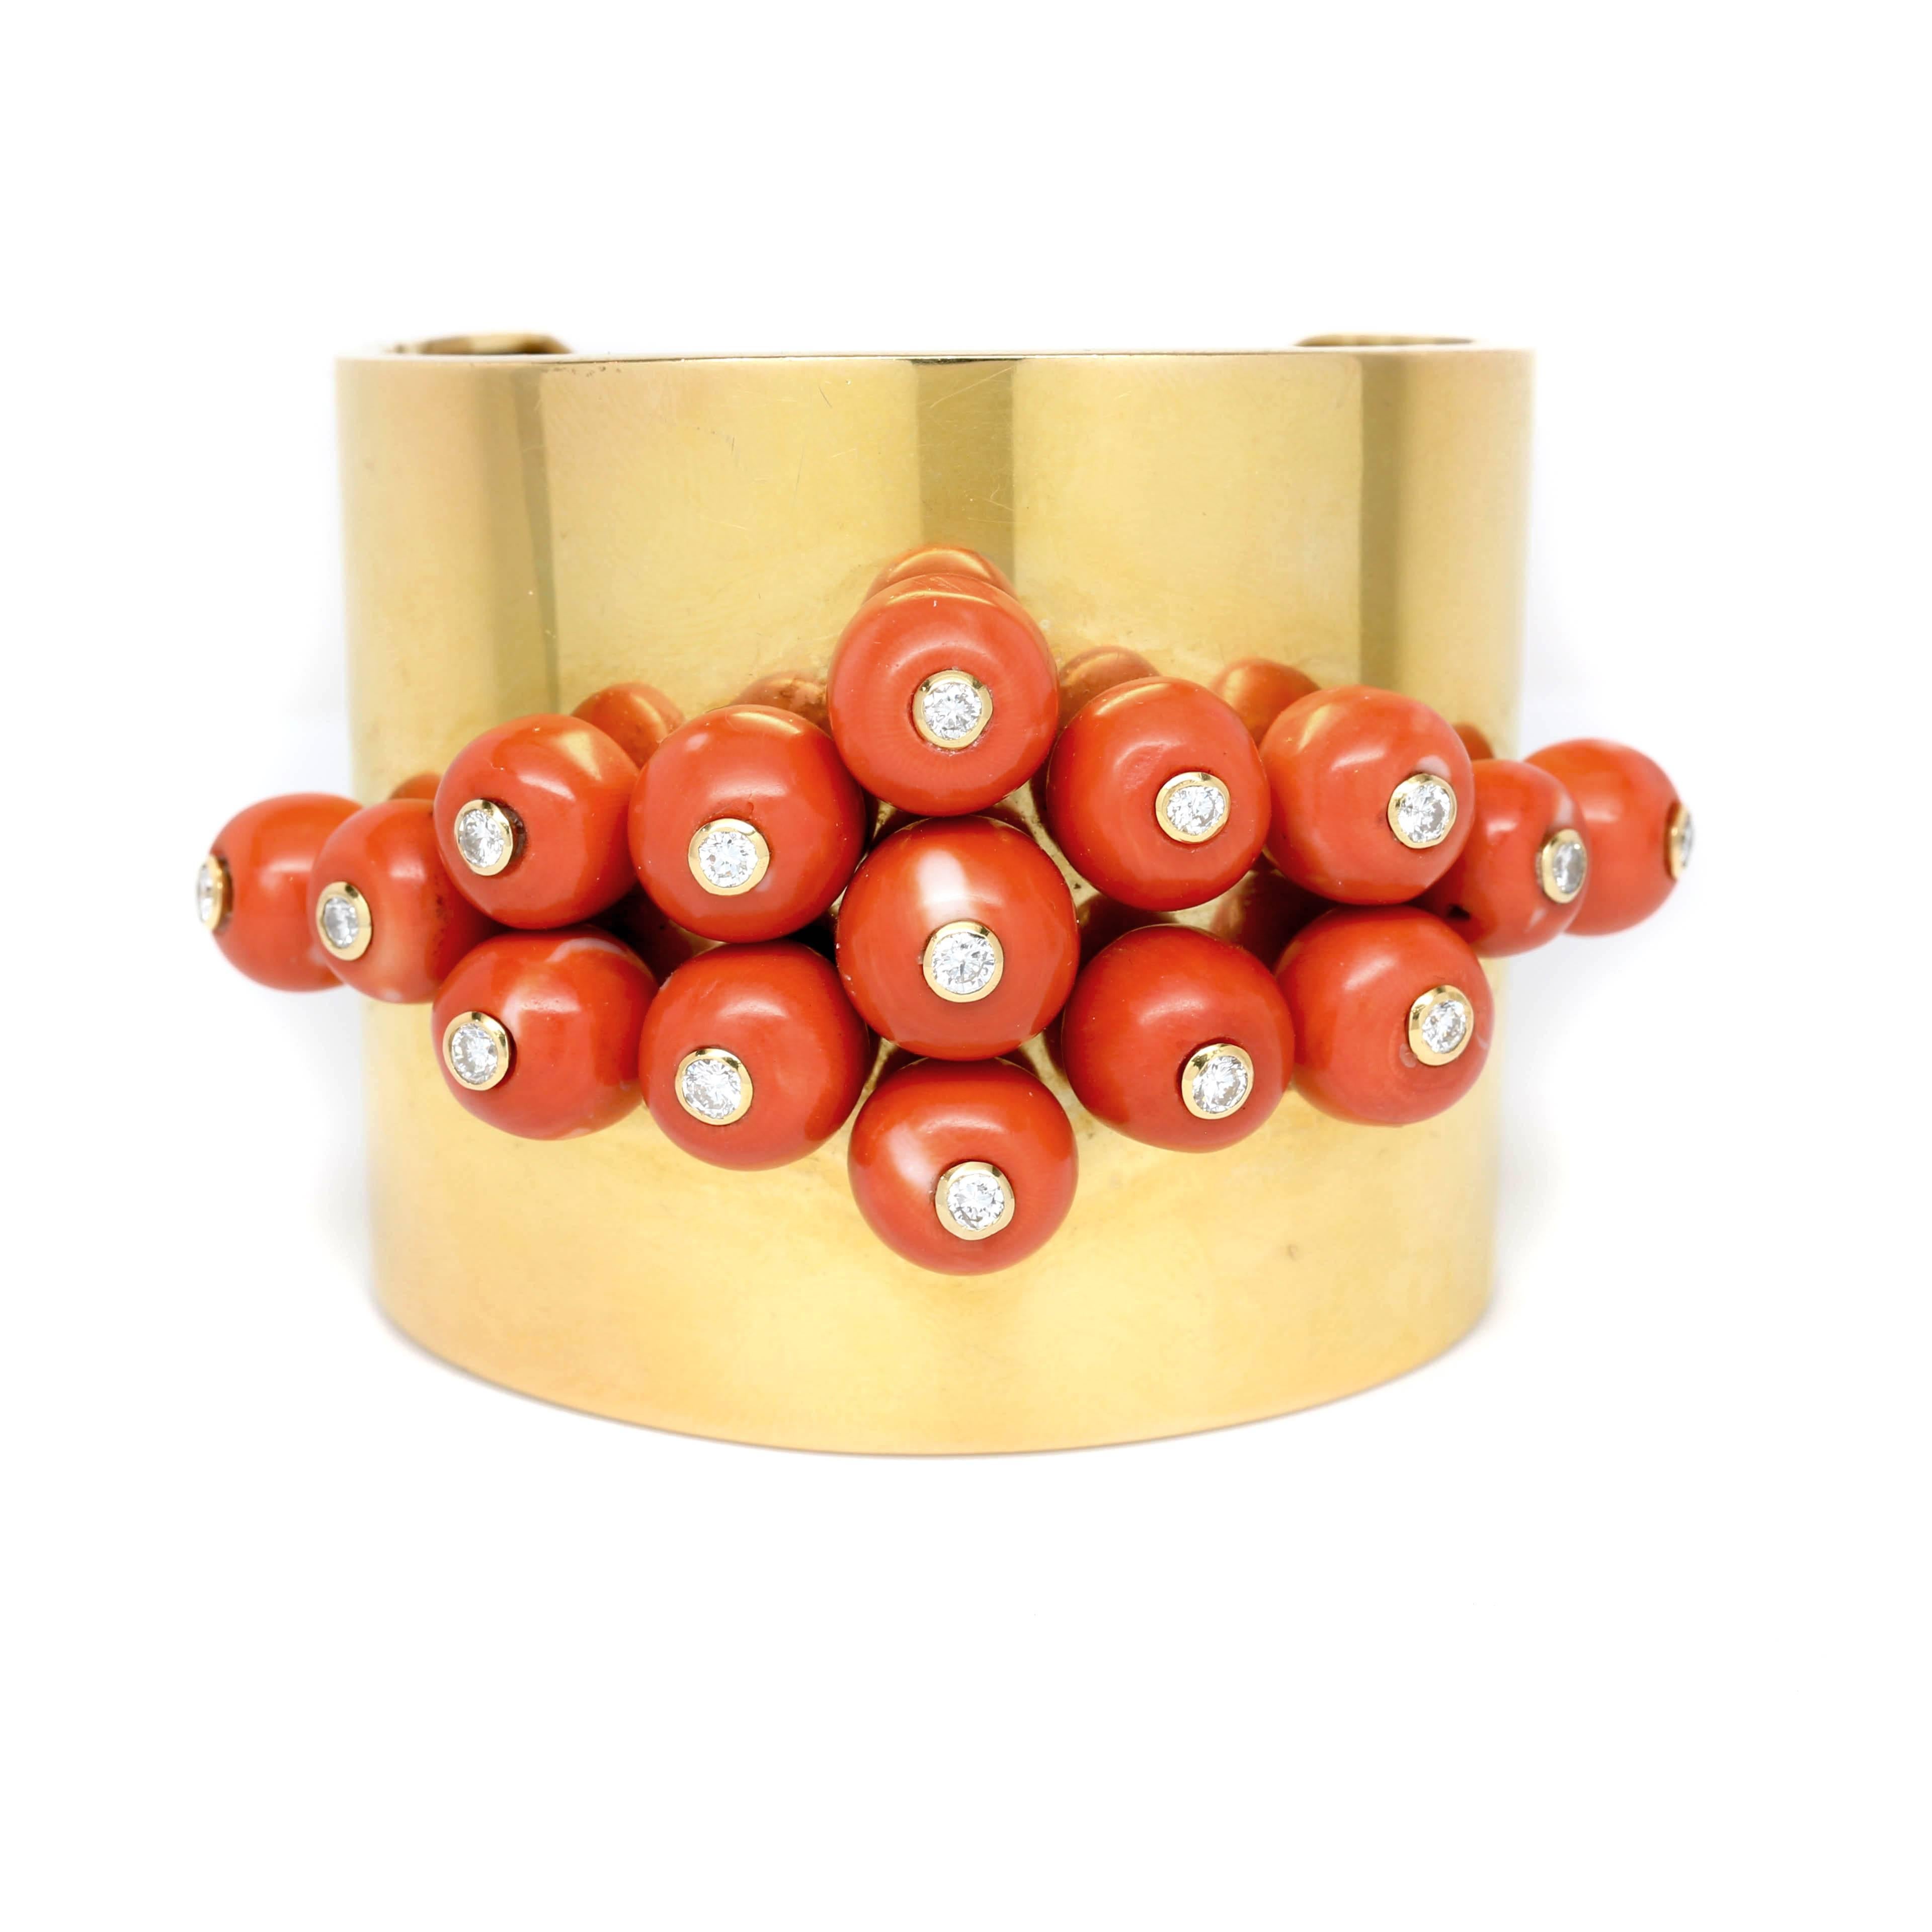 18K Cuff Bracelet made in the 1980s set with 16 Coral Balls and 16 Diamonds equaling Approx. 1.80 Carats